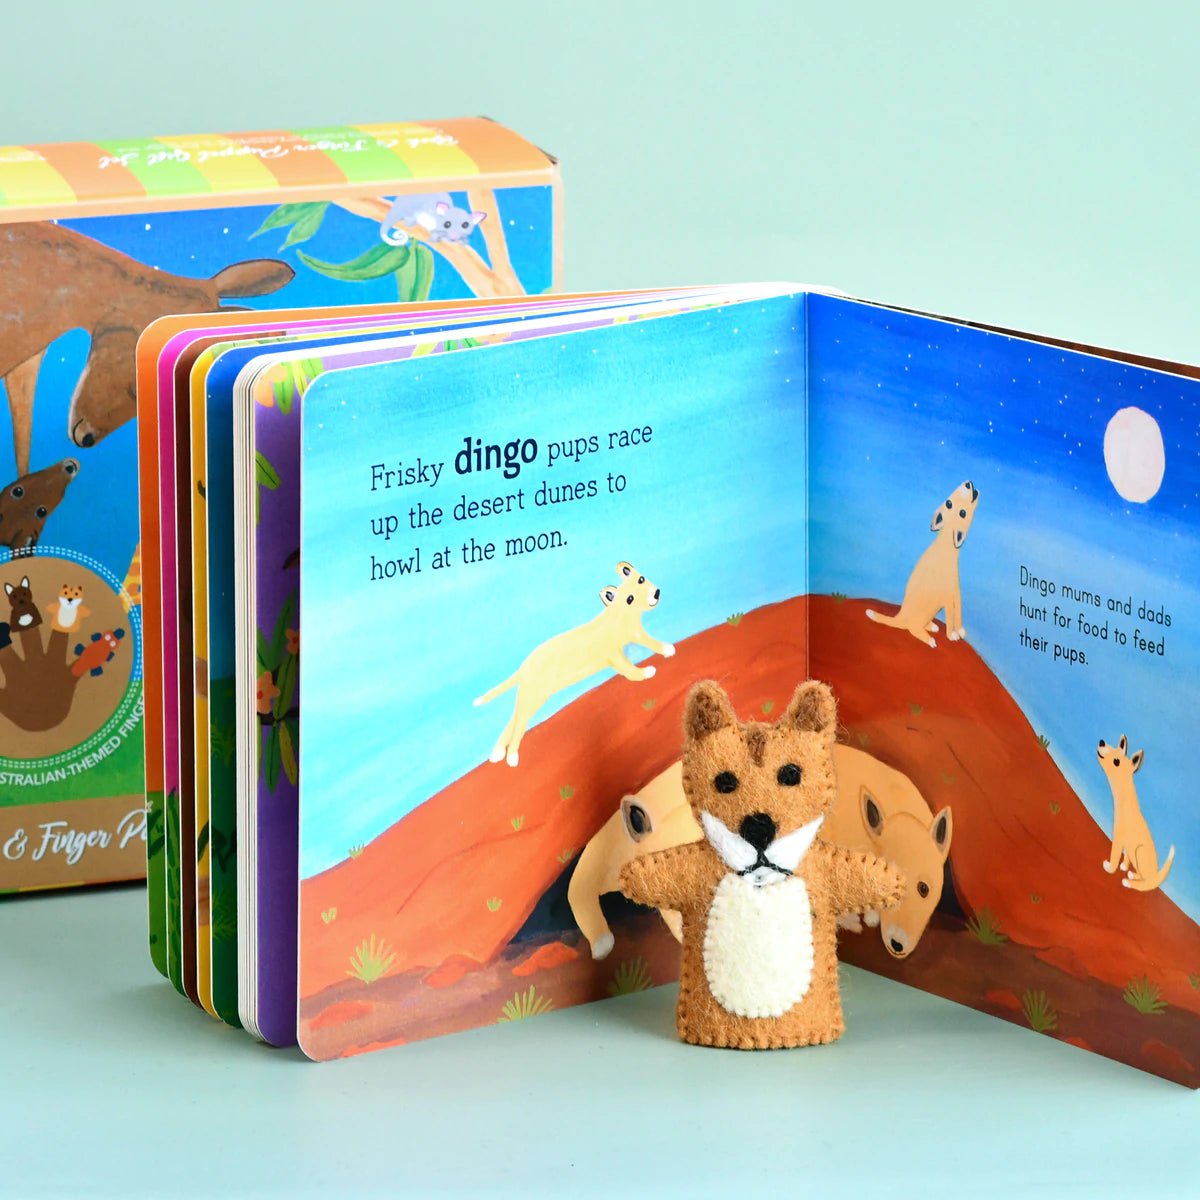 AUSTRALIAN BABY ANIMALS BY FRANÉ LESSAC - BOOK & FINGER PUPPET SET by TARA TREASURES - The Playful Collective